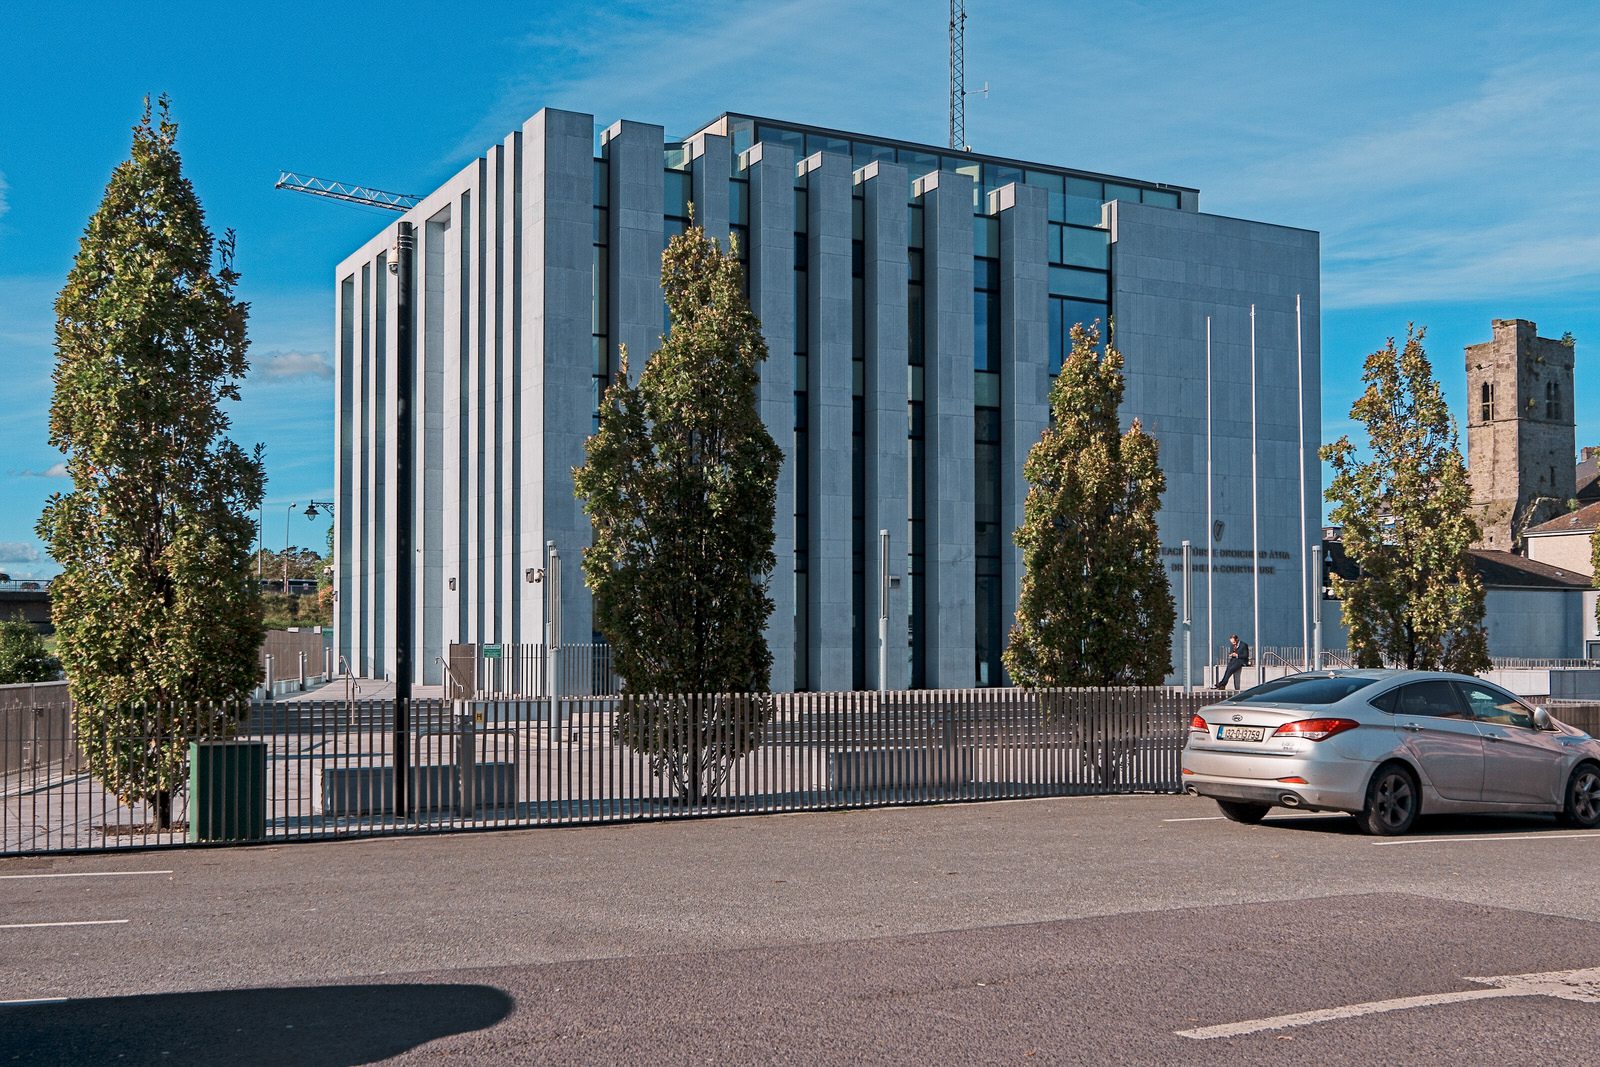 GARDA STATION AND NEW COURTHOUSE [IN CONTEXT WITHIN THE HISTORIC TOWN OF DROGHEDA]-224291-1